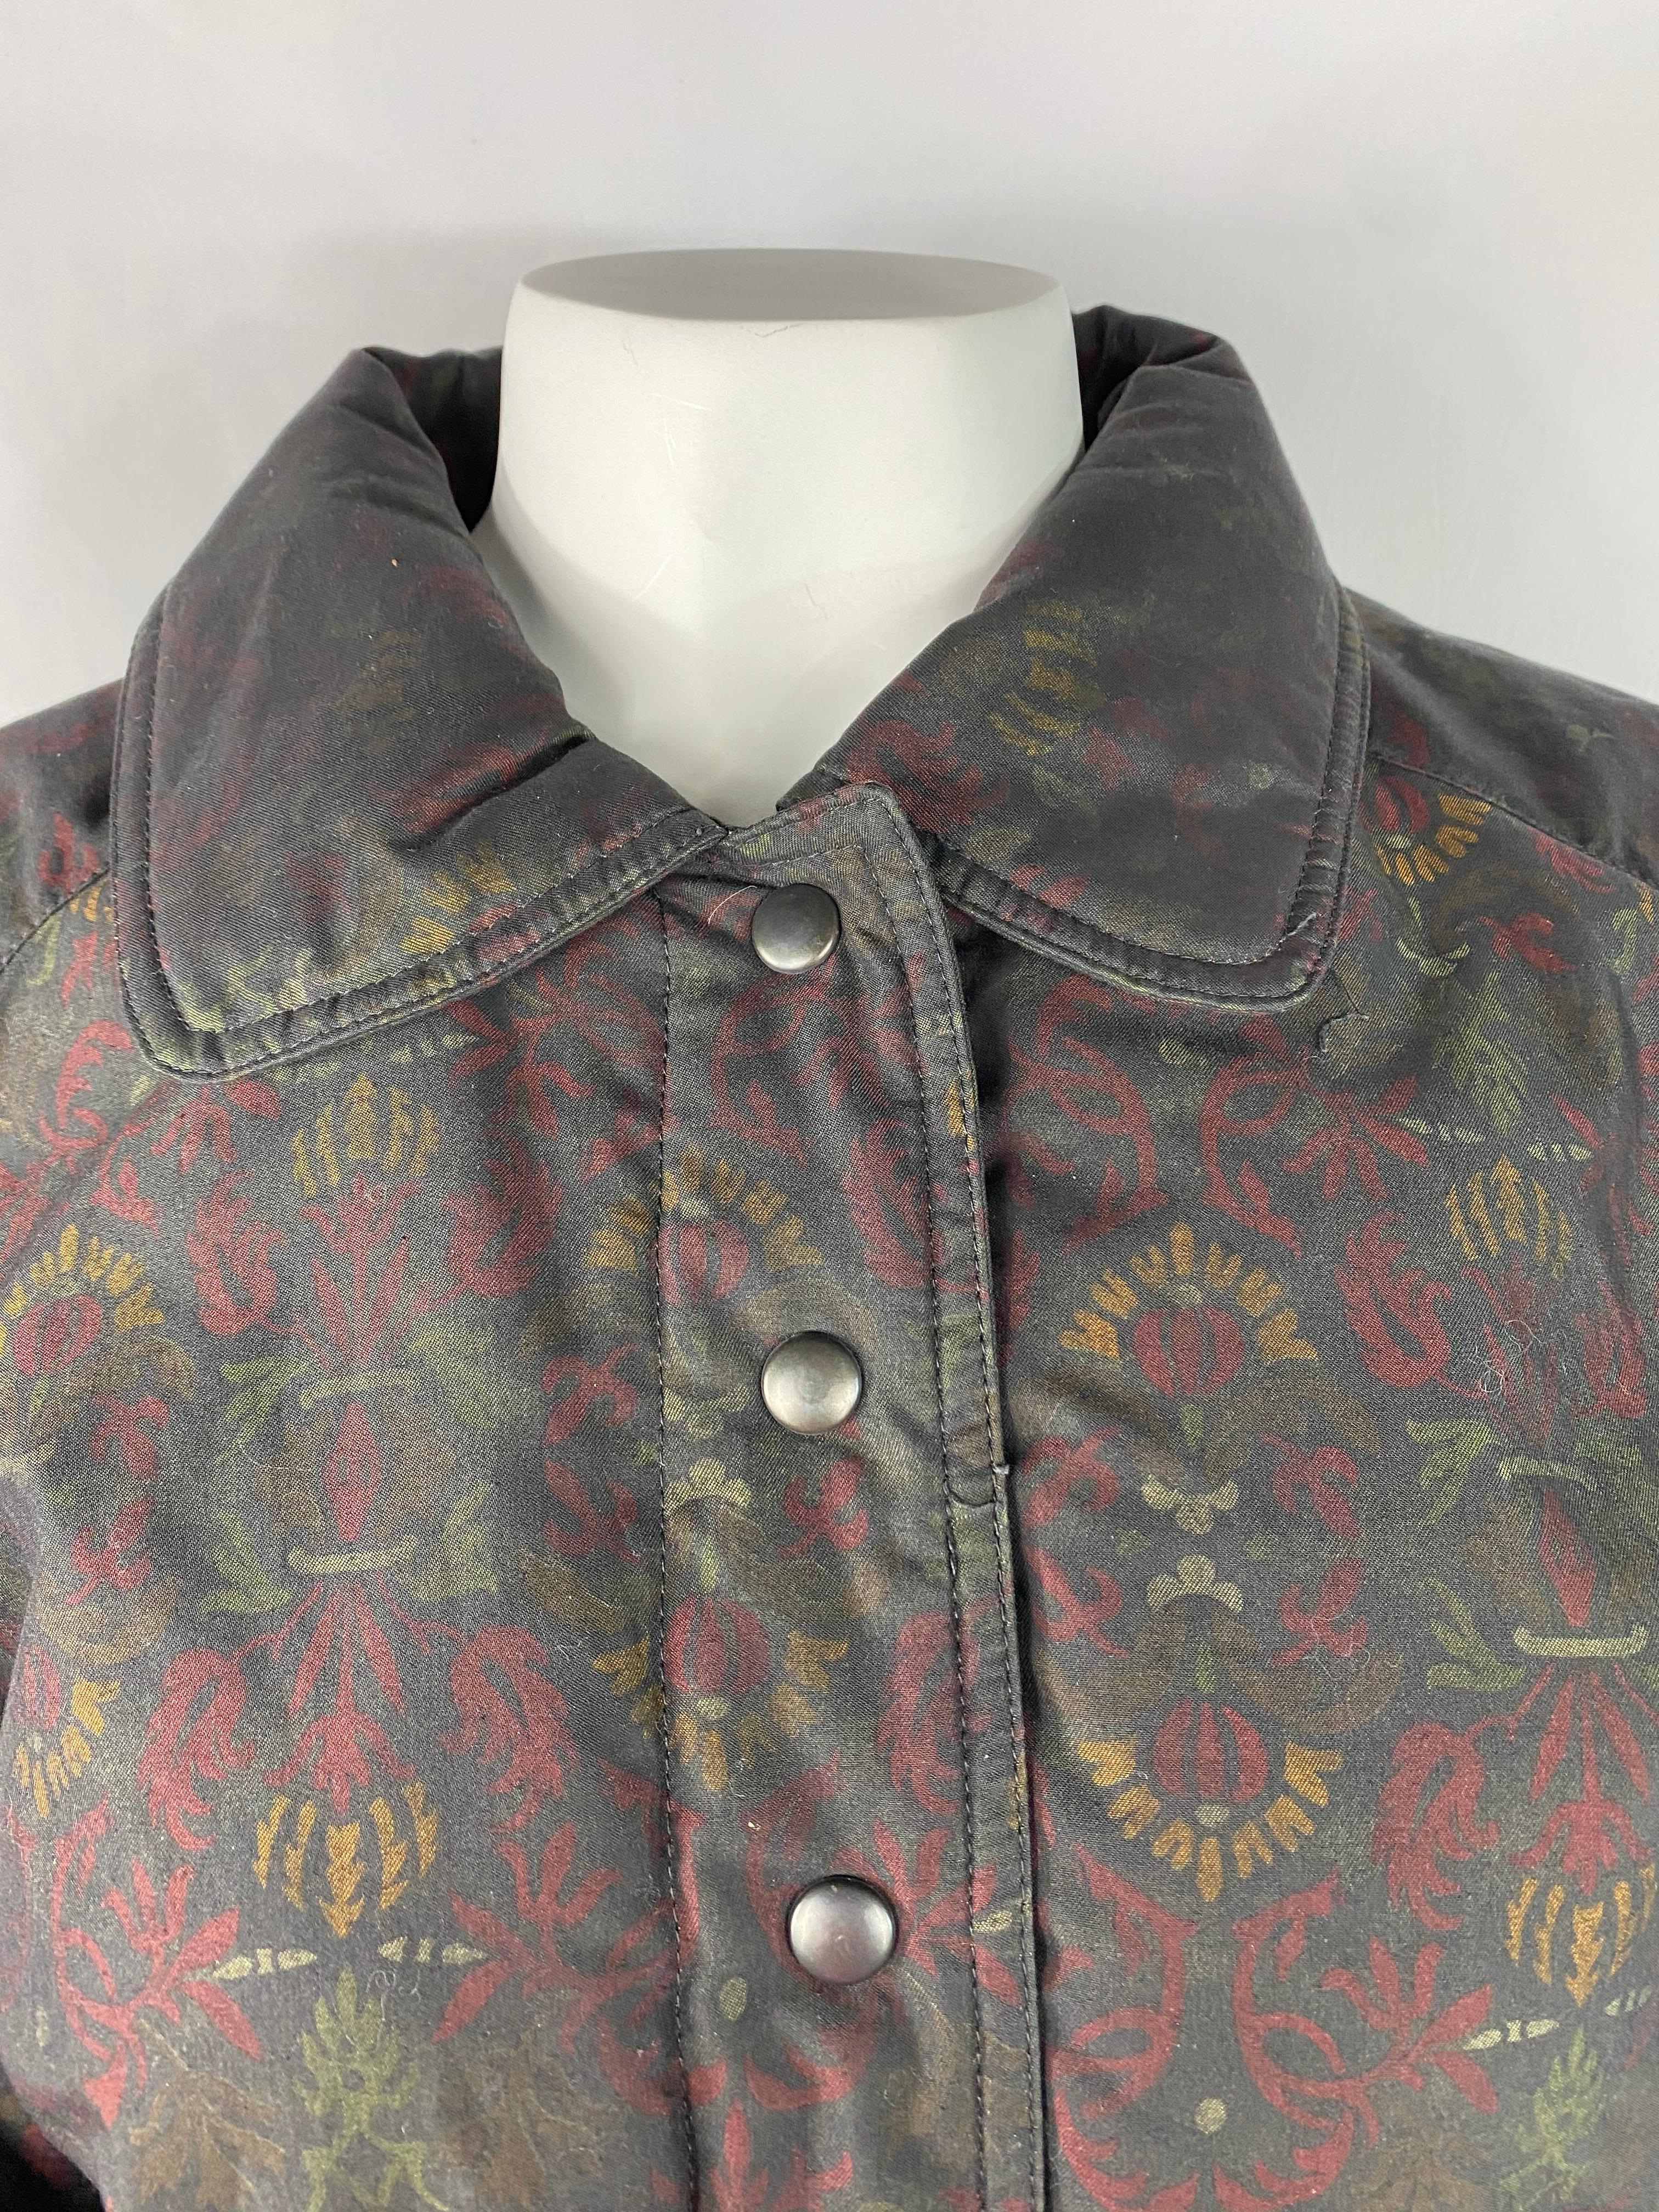 Featuring vintage Missoni Sport jacket with floral pattern design, front closure, pockets on each side and collar.
Made in Italy.
